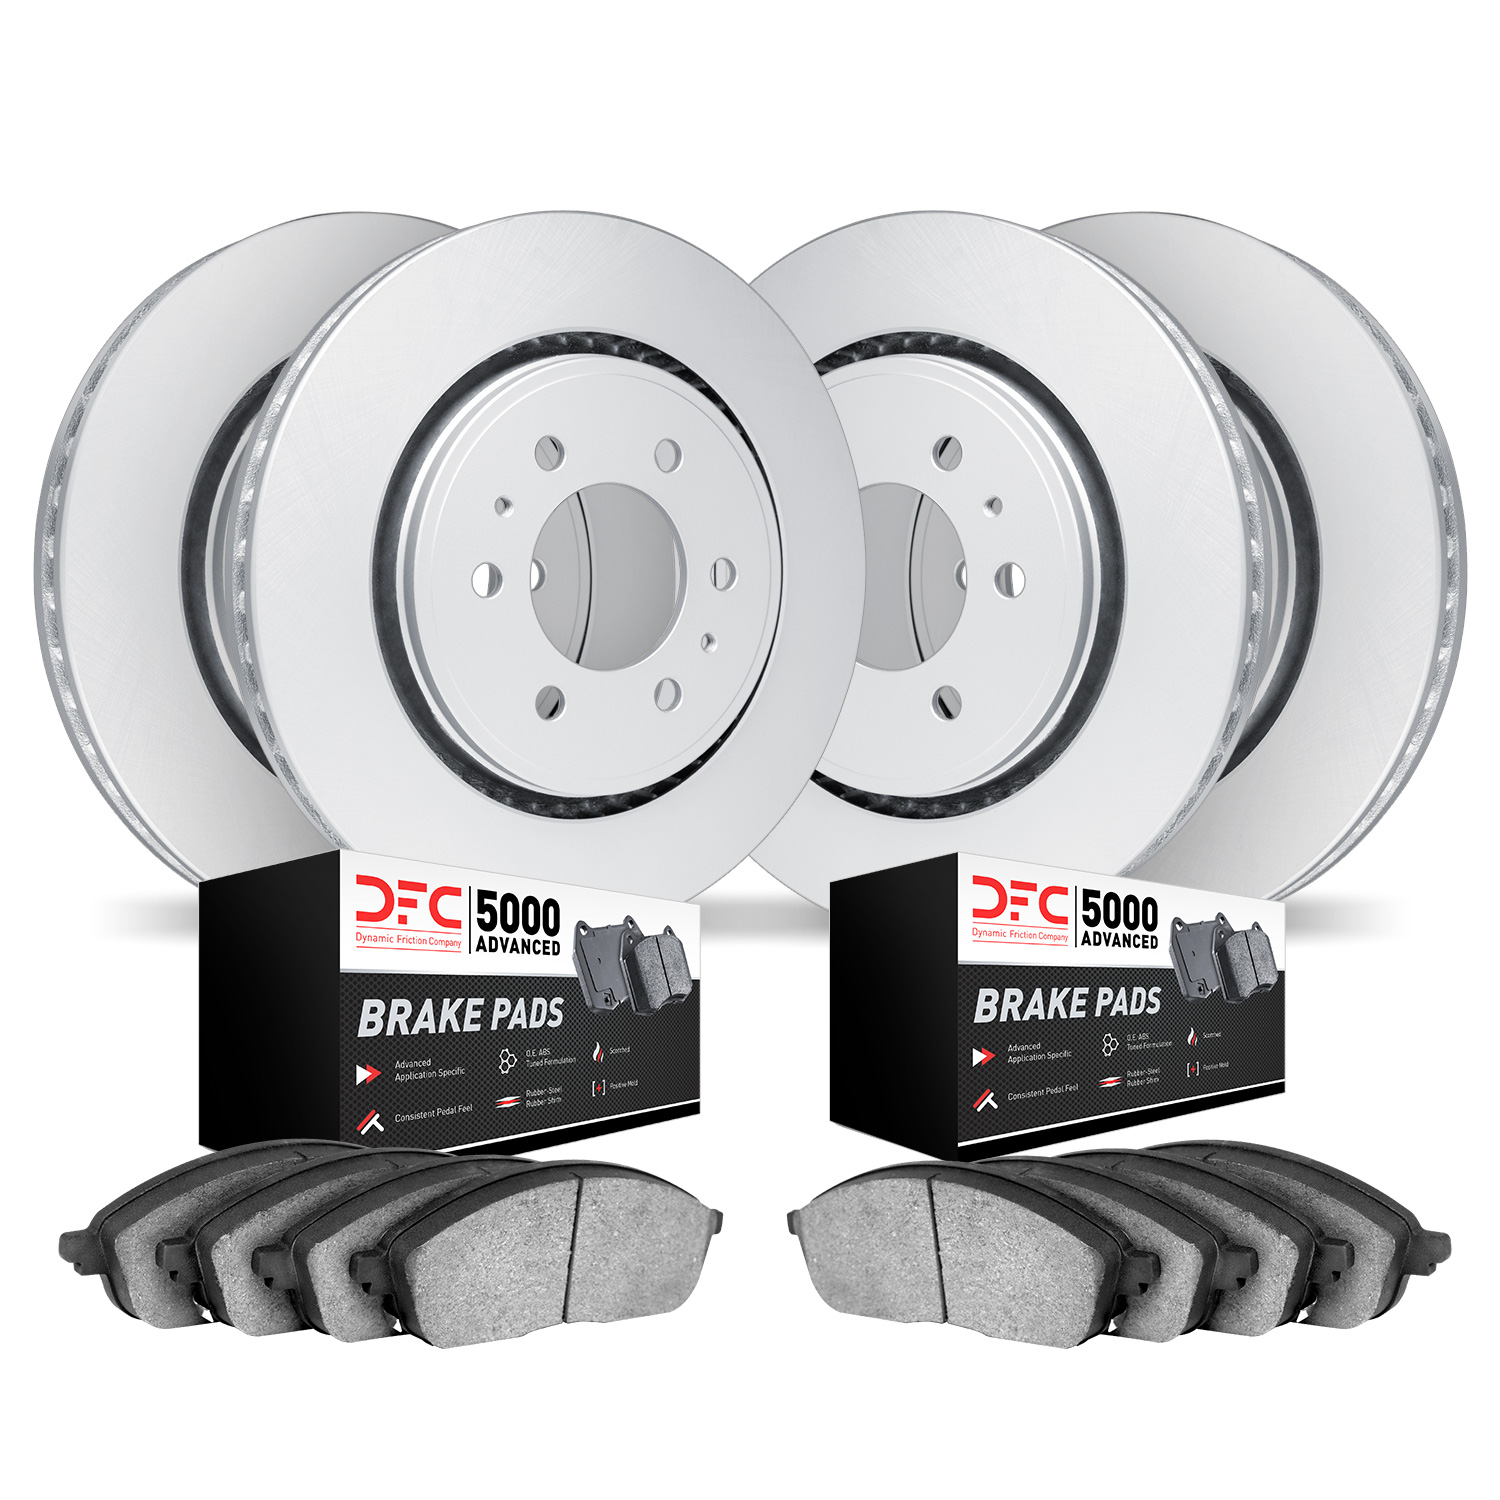 4504-48006 Geospec Brake Rotors w/5000 Advanced Brake Pads Kit, Fits Select GM, Position: Front and Rear